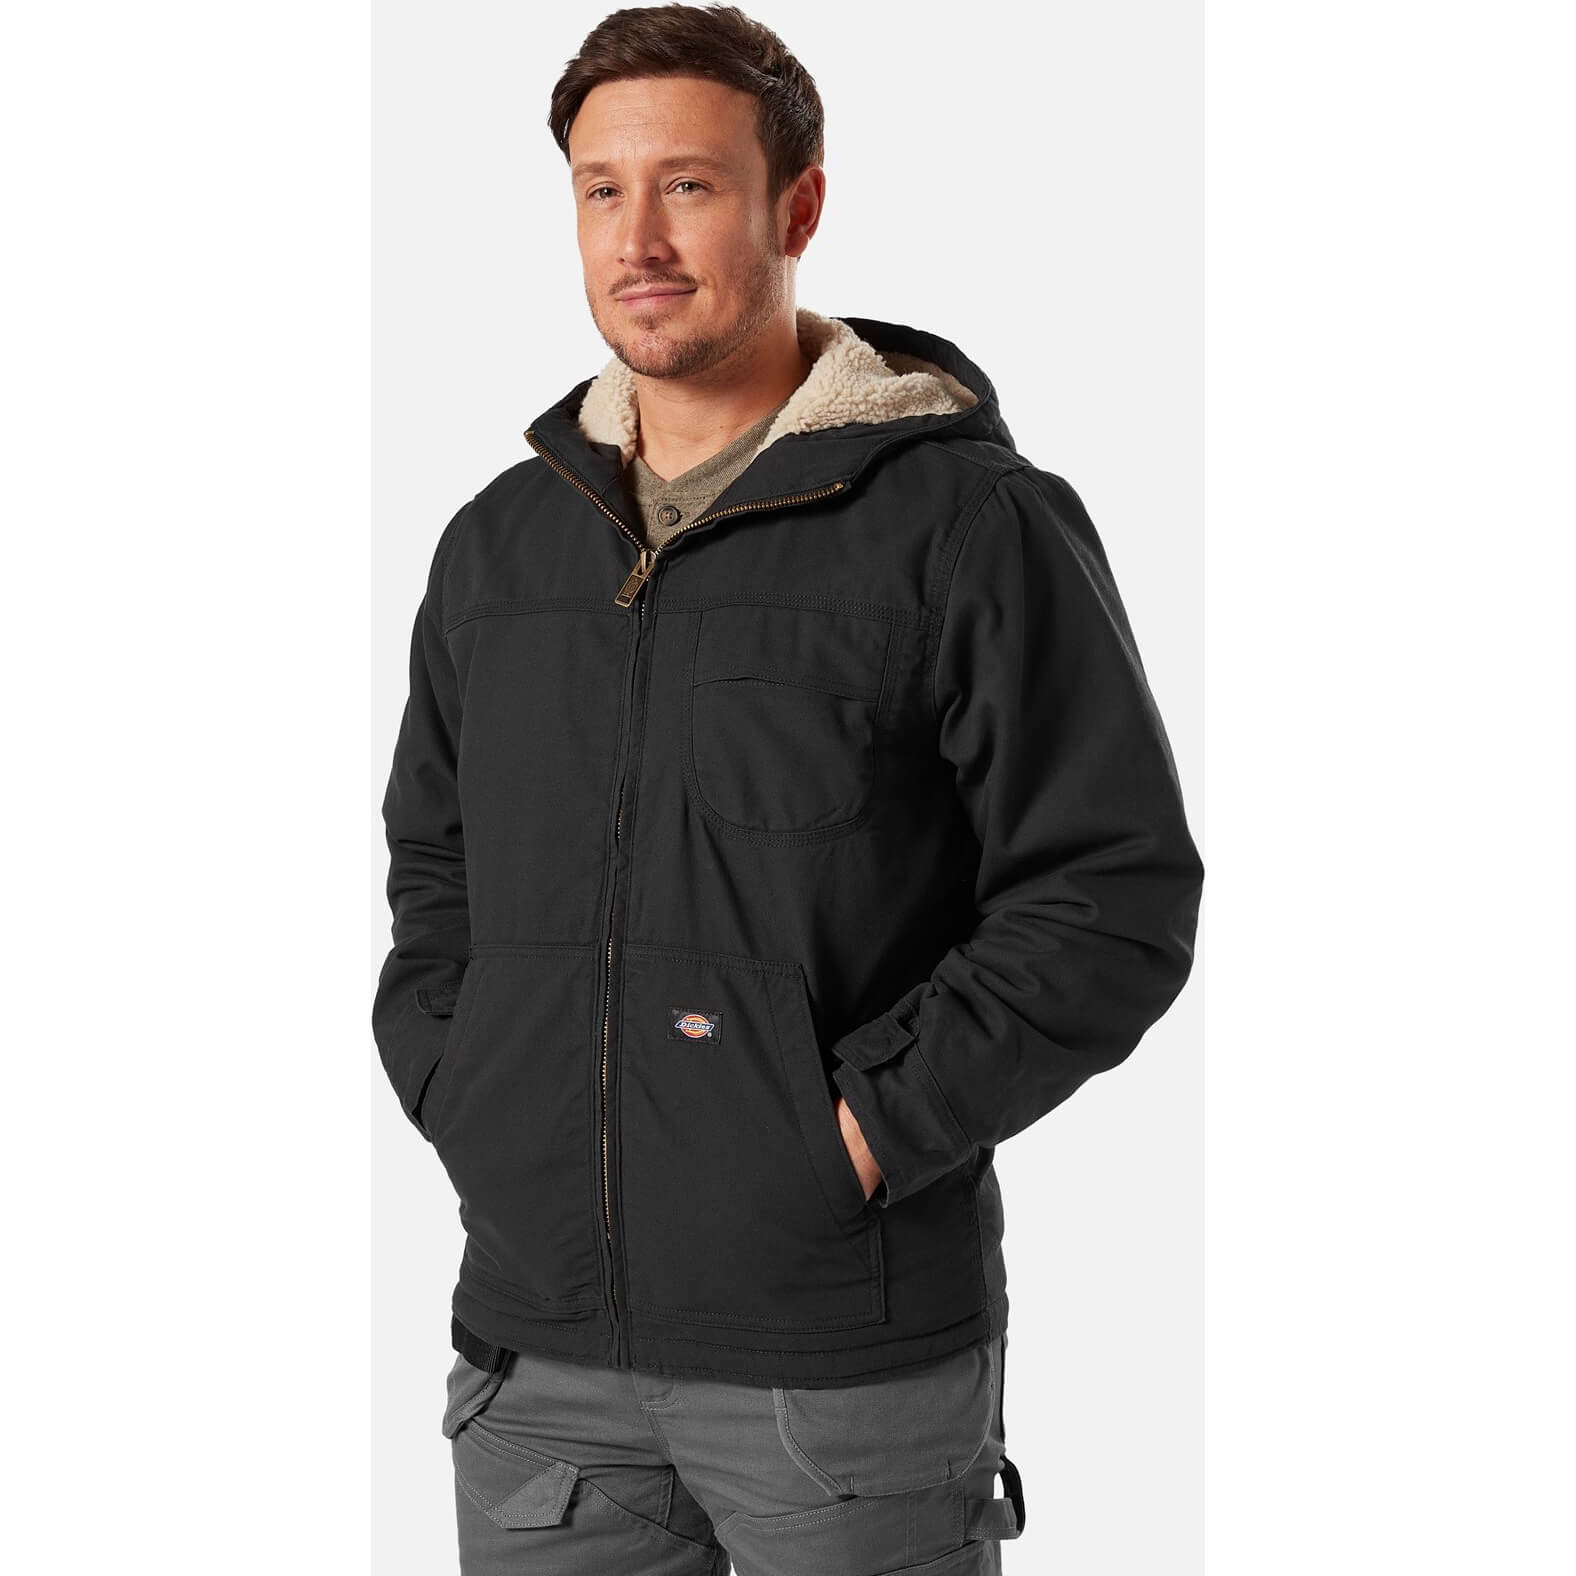 Image of Dickies Sherpa Lined Duck Jacket Black 2XL